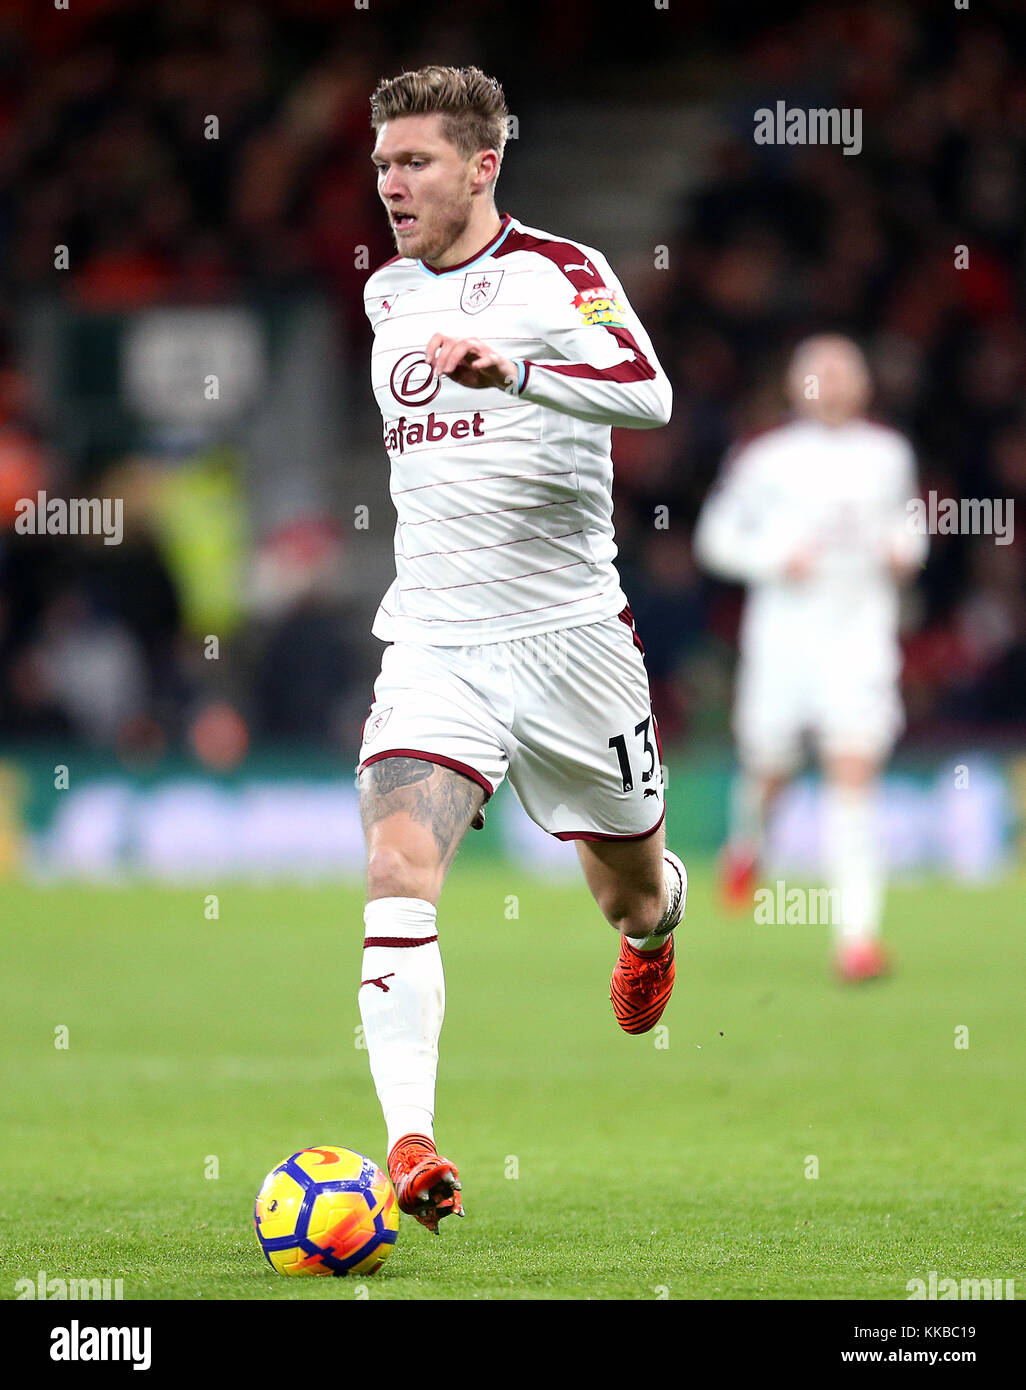 Burnley's Jeff Hendrick during the Premier League match at the Vitality Stadium, Bournemouth. PRESS ASSOCIATION Photo. Picture date: Wednesday November 29, 2017. See PA story SOCCER Bournemouth. Photo credit should read: Steven Paston/PA Wire. RESTRICTIONS: No use with unauthorised audio, video, data, fixture lists, club/league logos or 'live' services. Online in-match use limited to 75 images, no video emulation. No use in betting, games or single club/league/player publications. Stock Photo